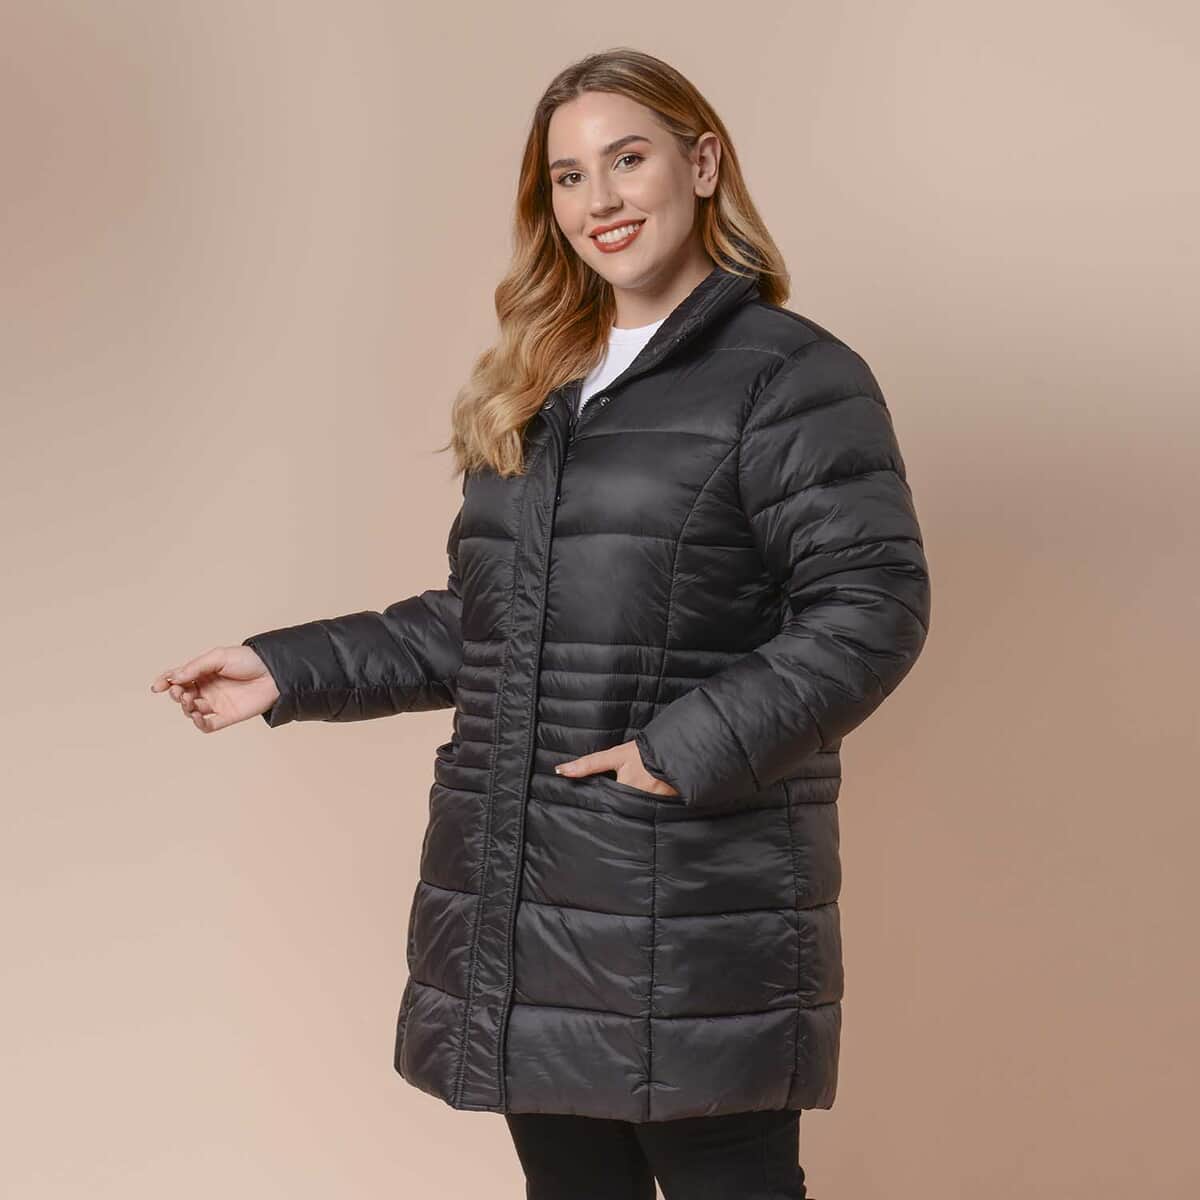 Passage Black Long Sleeve Women Coat with 2 Zipper Pocket (L, Shell: 100% Nylon and Lining: 100% Polyester) image number 1